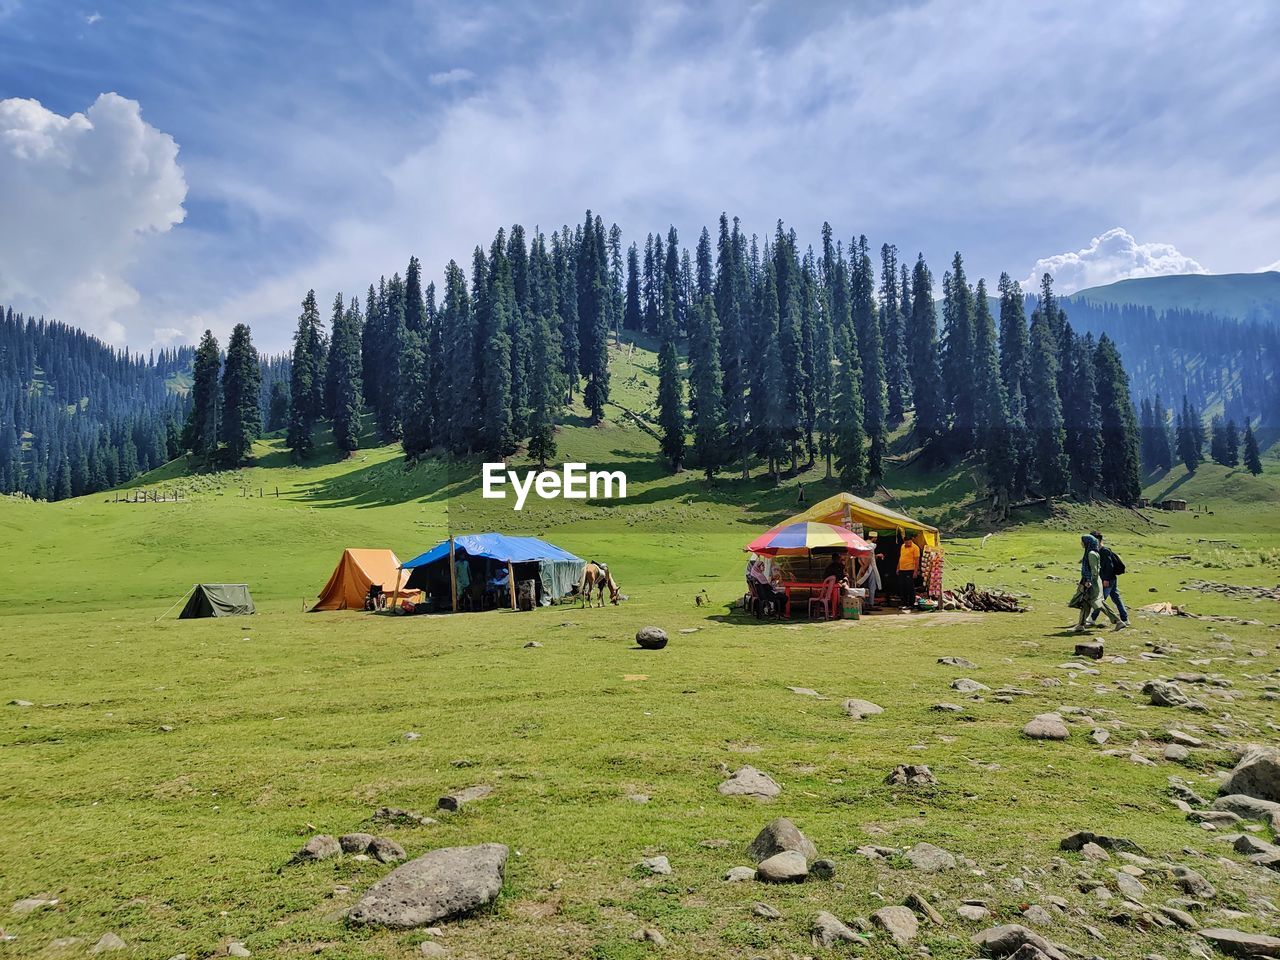 mountain range, plant, meadow, wilderness, scenics - nature, landscape, environment, land, sky, tree, mountain, nature, beauty in nature, cloud, grassland, grass, pasture, forest, plateau, camping, travel destinations, non-urban scene, travel, green, field, tent, plain, tranquil scene, pine tree, tranquility, coniferous tree, architecture, hut, pinaceae, pine woodland, no people, adventure, leisure activity, built structure, house, rural scene, activity, building, idyllic, tourism, valley, day, building exterior, outdoors, summer, highland, rural area, vacation, mountain peak, holiday, trip, ridge, woodland, remote